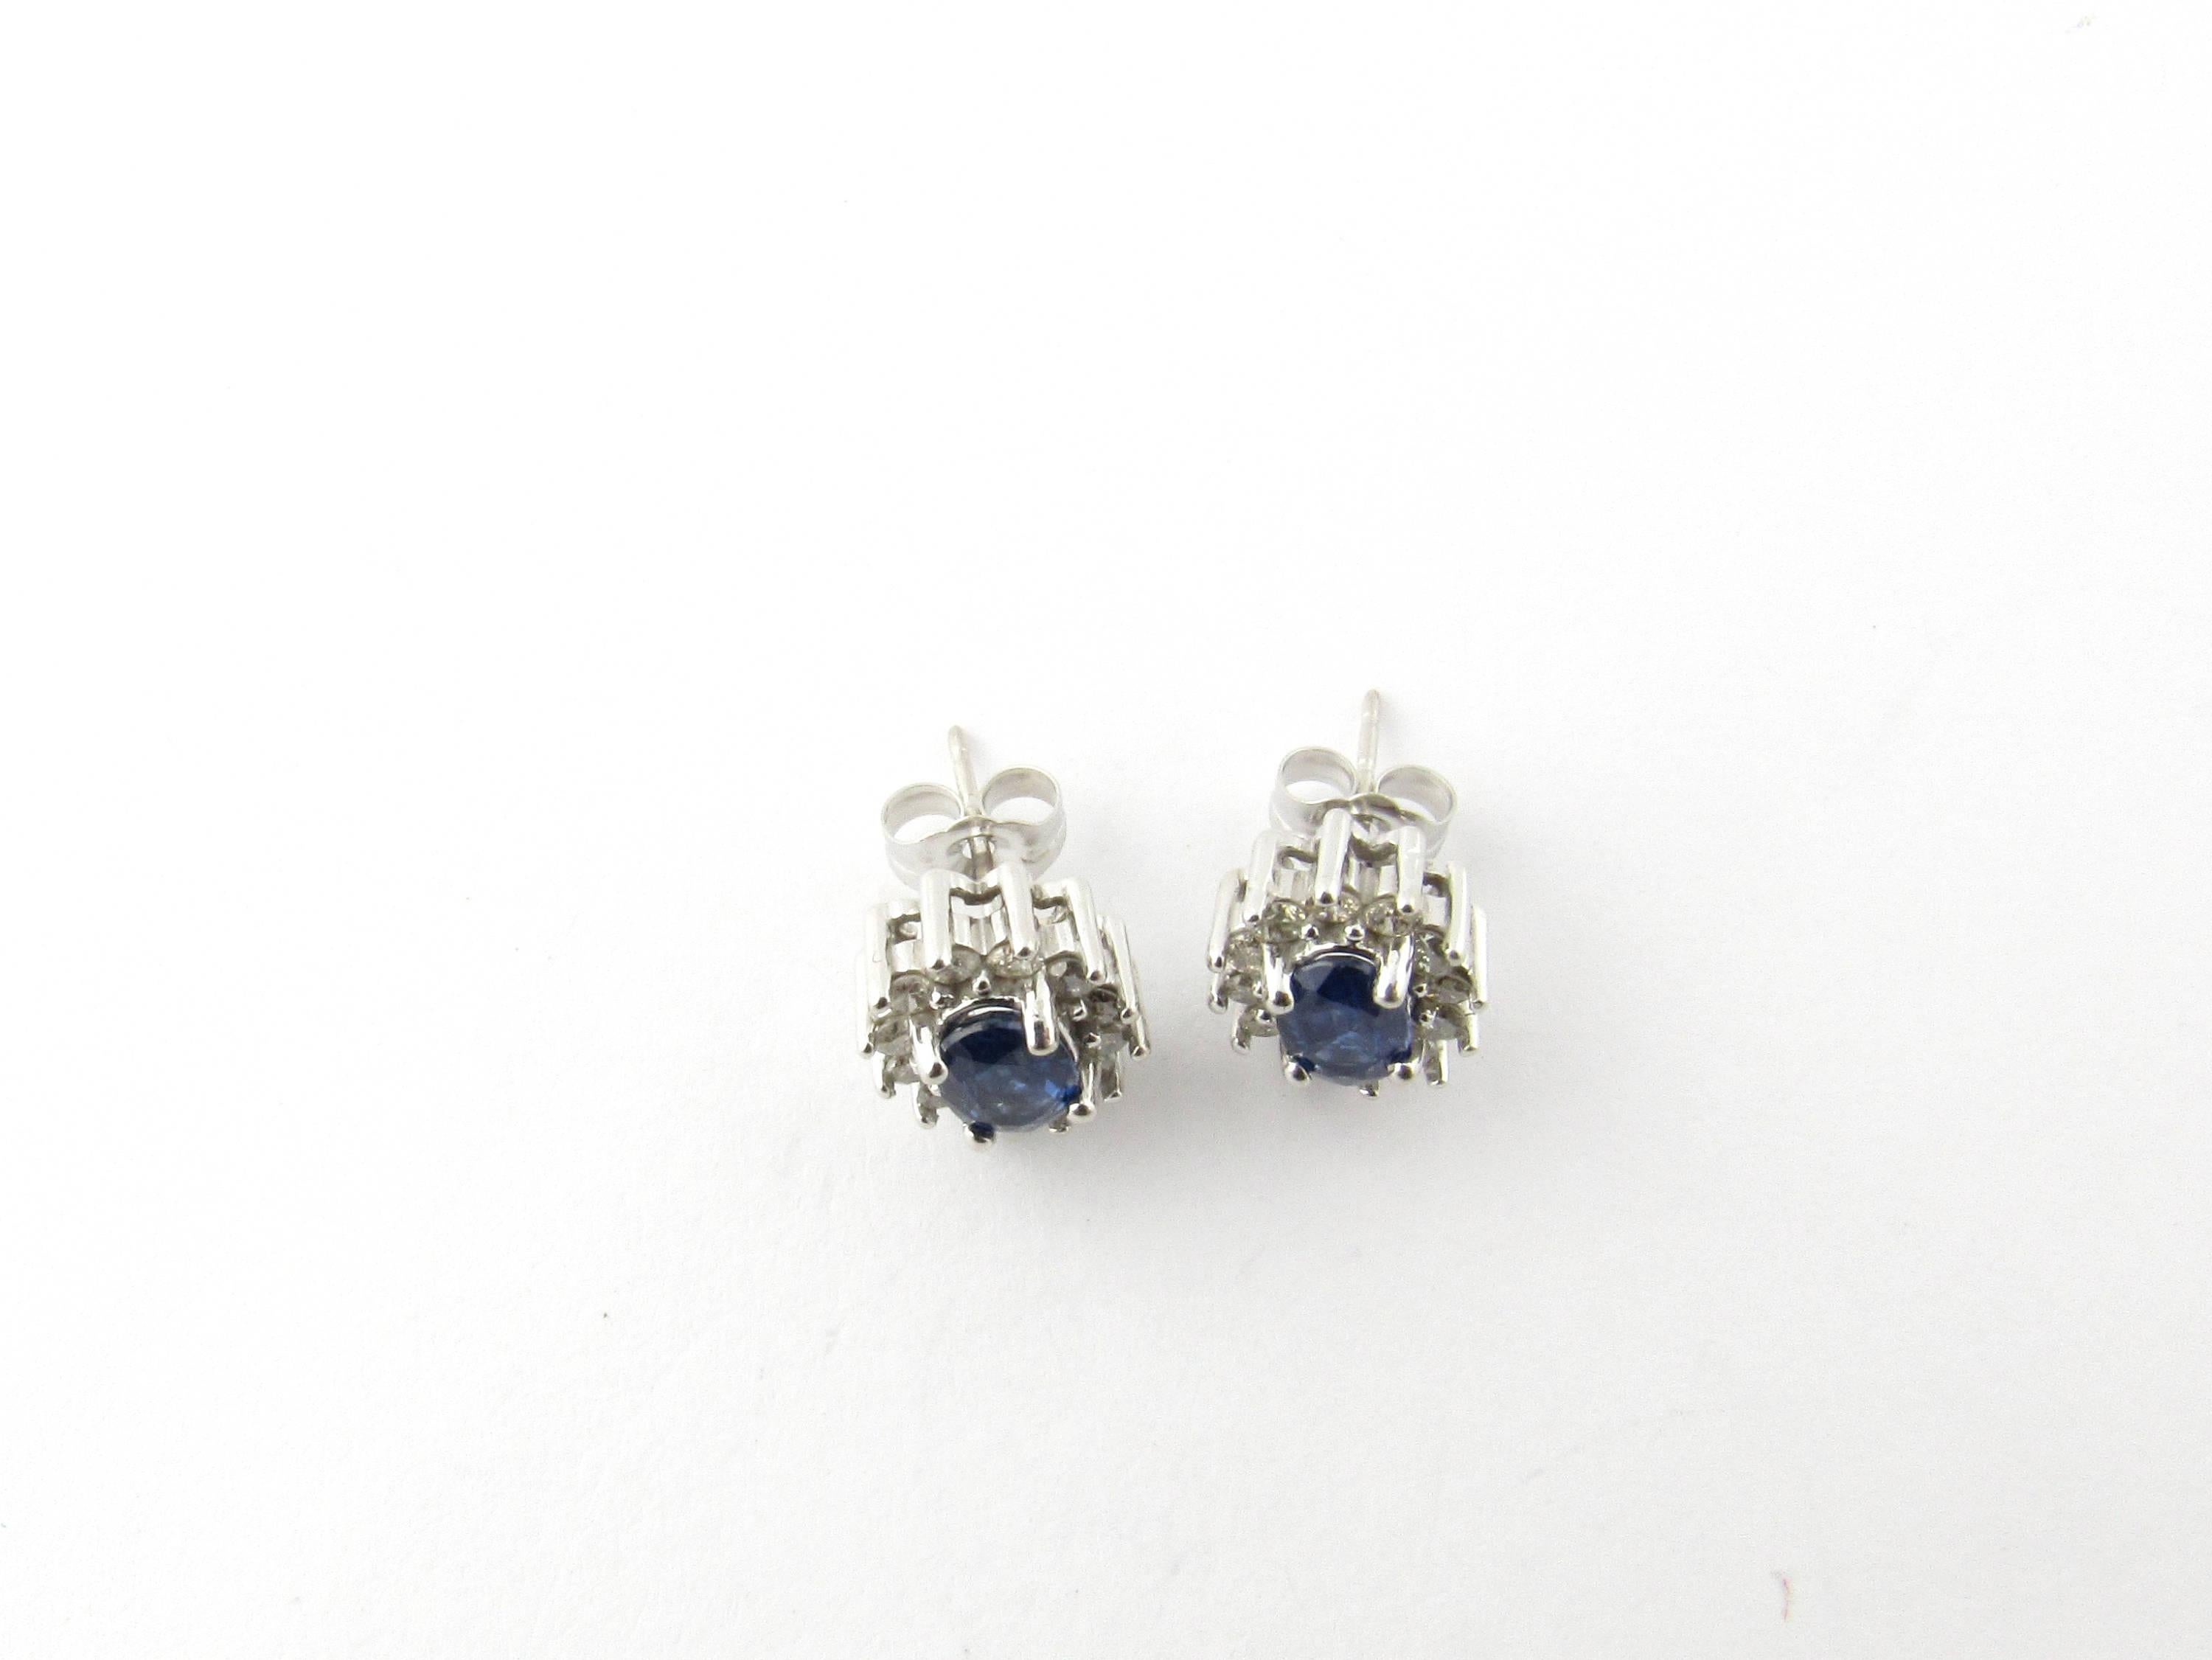 Vintage 14 Karat White Gold Sapphire and Diamond Earrings-

These exquisite earrings each feature a genuine oval sapphire (6 mm x 4 mm) surrounded by 12 round brilliant cut diamonds (.02 ct. each) and set in 14K white gold. Push back